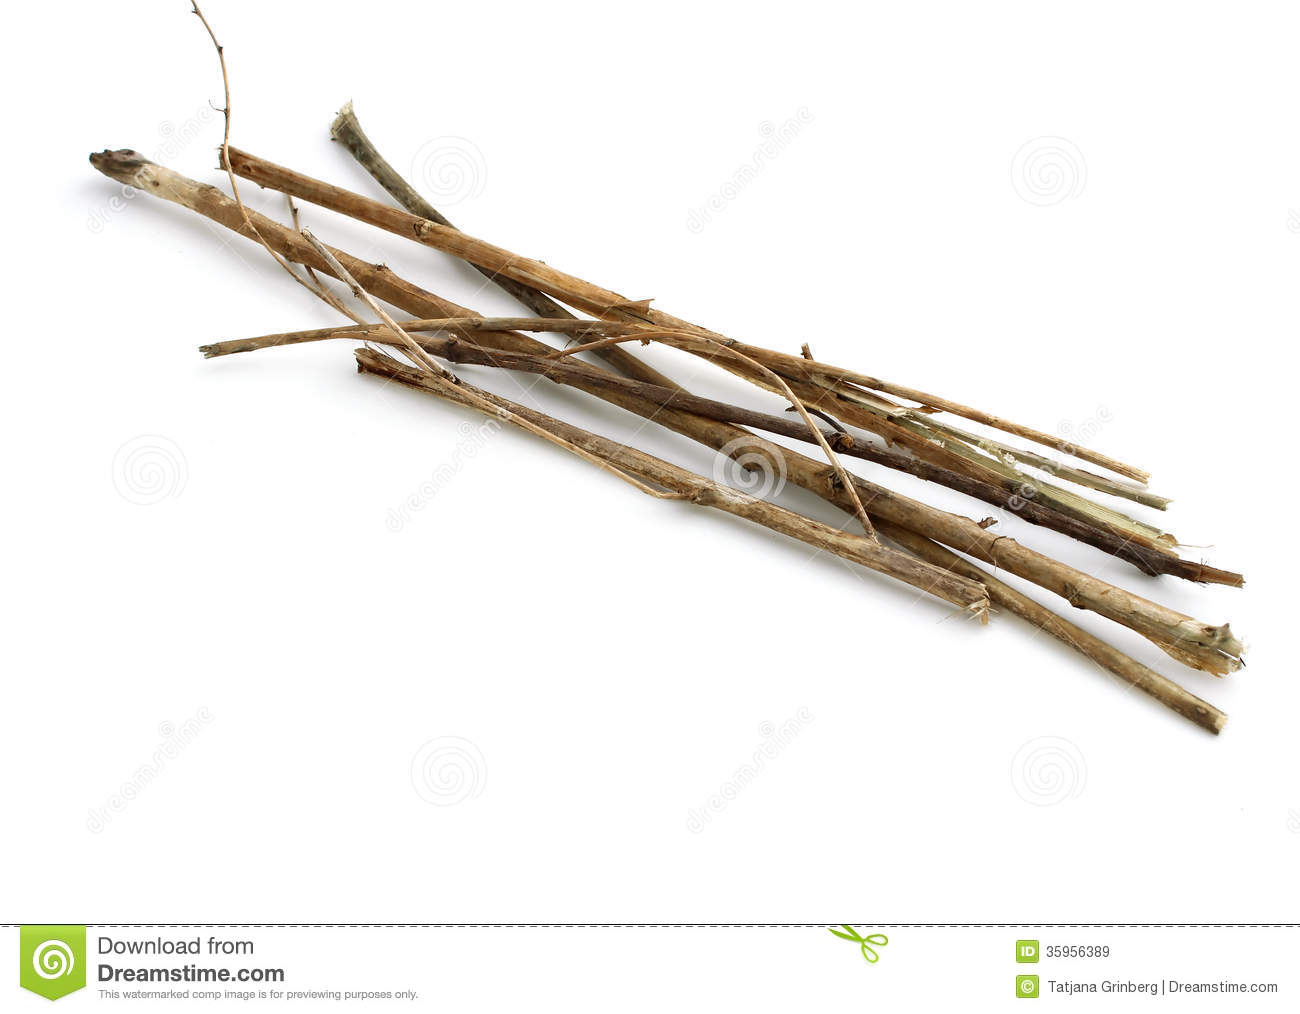 Sticks And Twigs Wood Bundle On White Royalty Free Stock Images